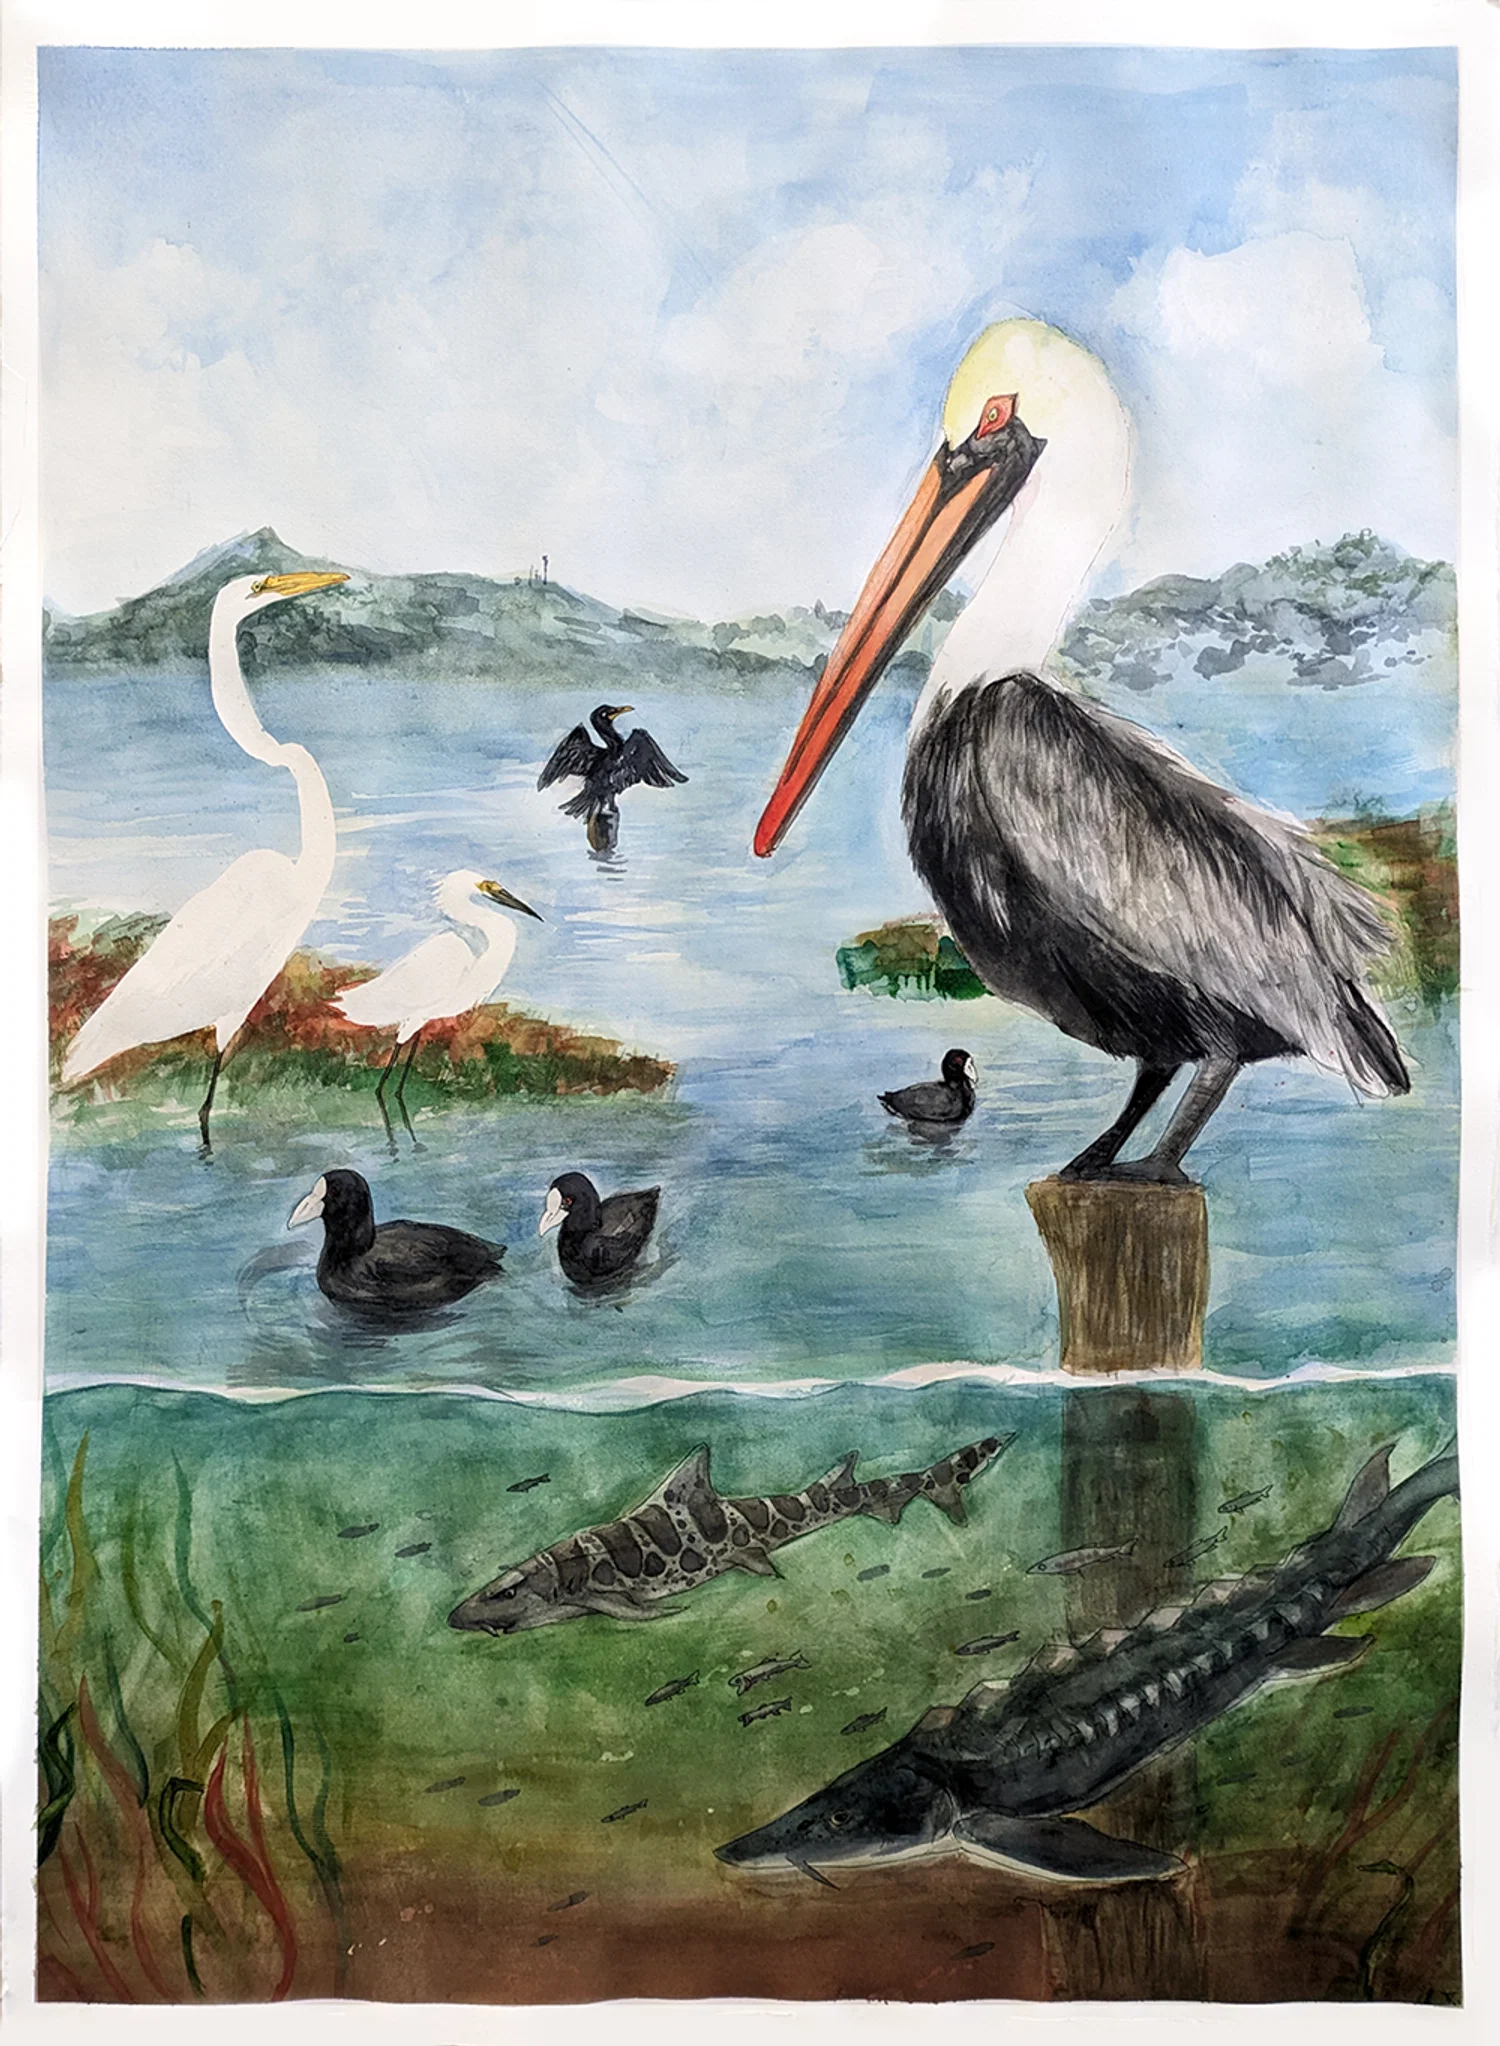 A watercolor painting depicting a variety of wildlife in a marsh environment, including a brown pelican, great egret, snowy egret, American coots, double-crested cormorant, green sturgeon, leopard shark, and anchovies. The mountains of the San Francisco East Bay, including Fremont Peak and Mount Hamilton, are visible in the background.